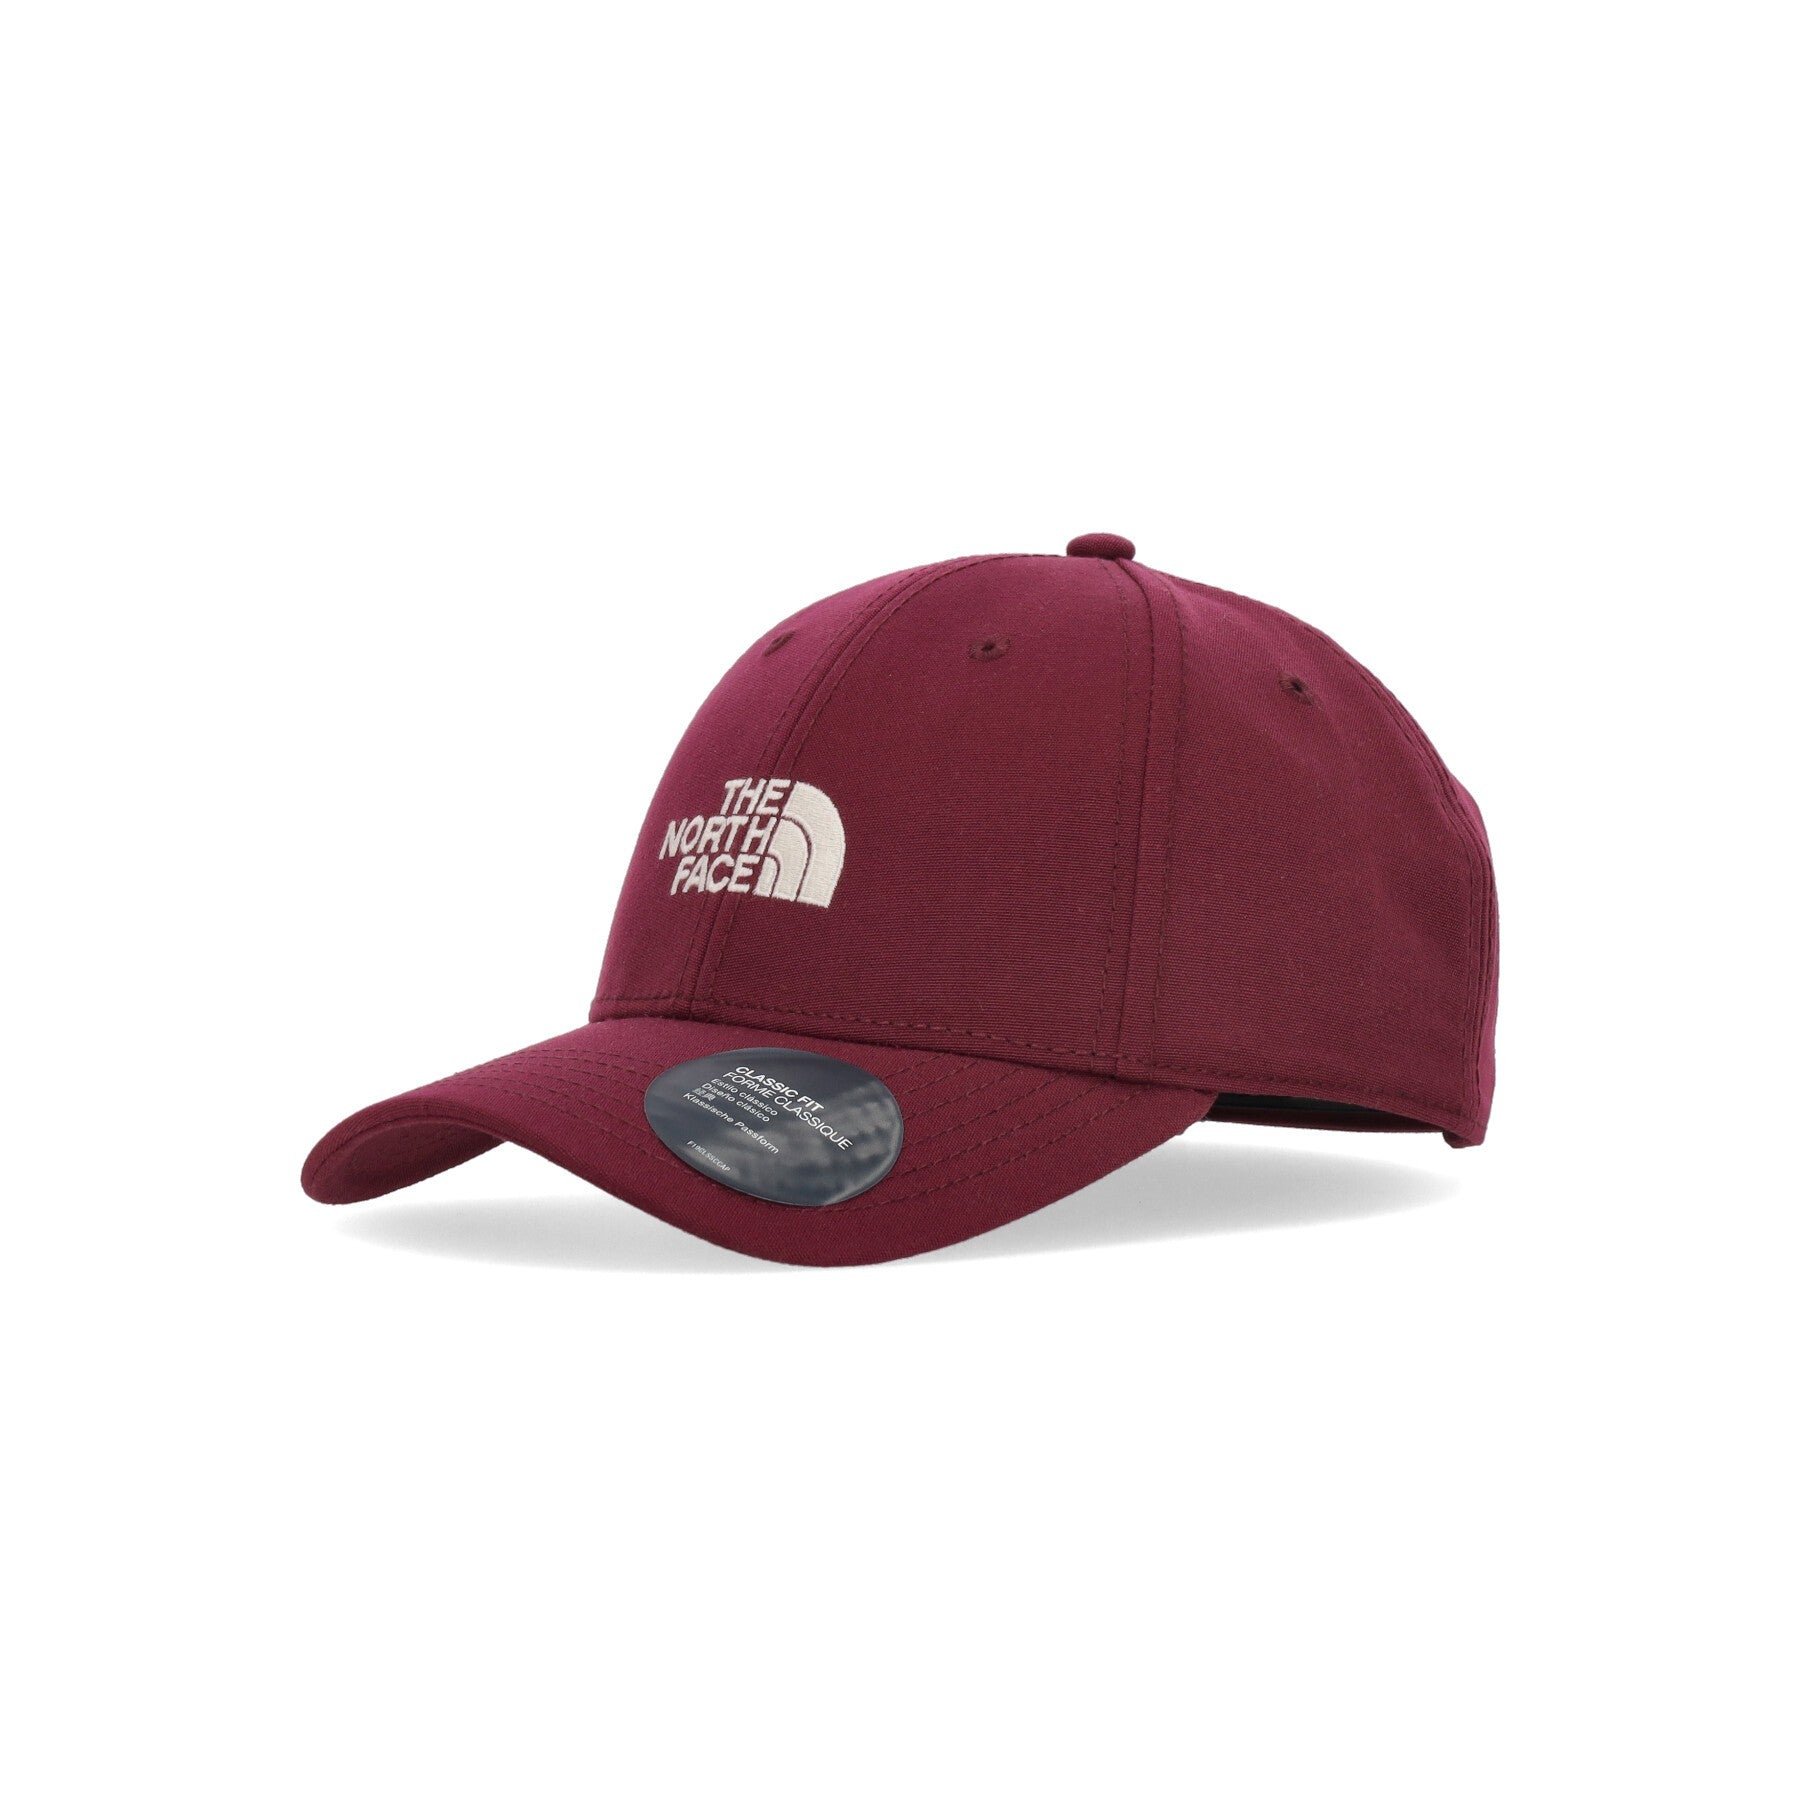 The North Face, Cappellino Visiera Curva Unisex Recycled 66 Classic Hat, Boysenberry